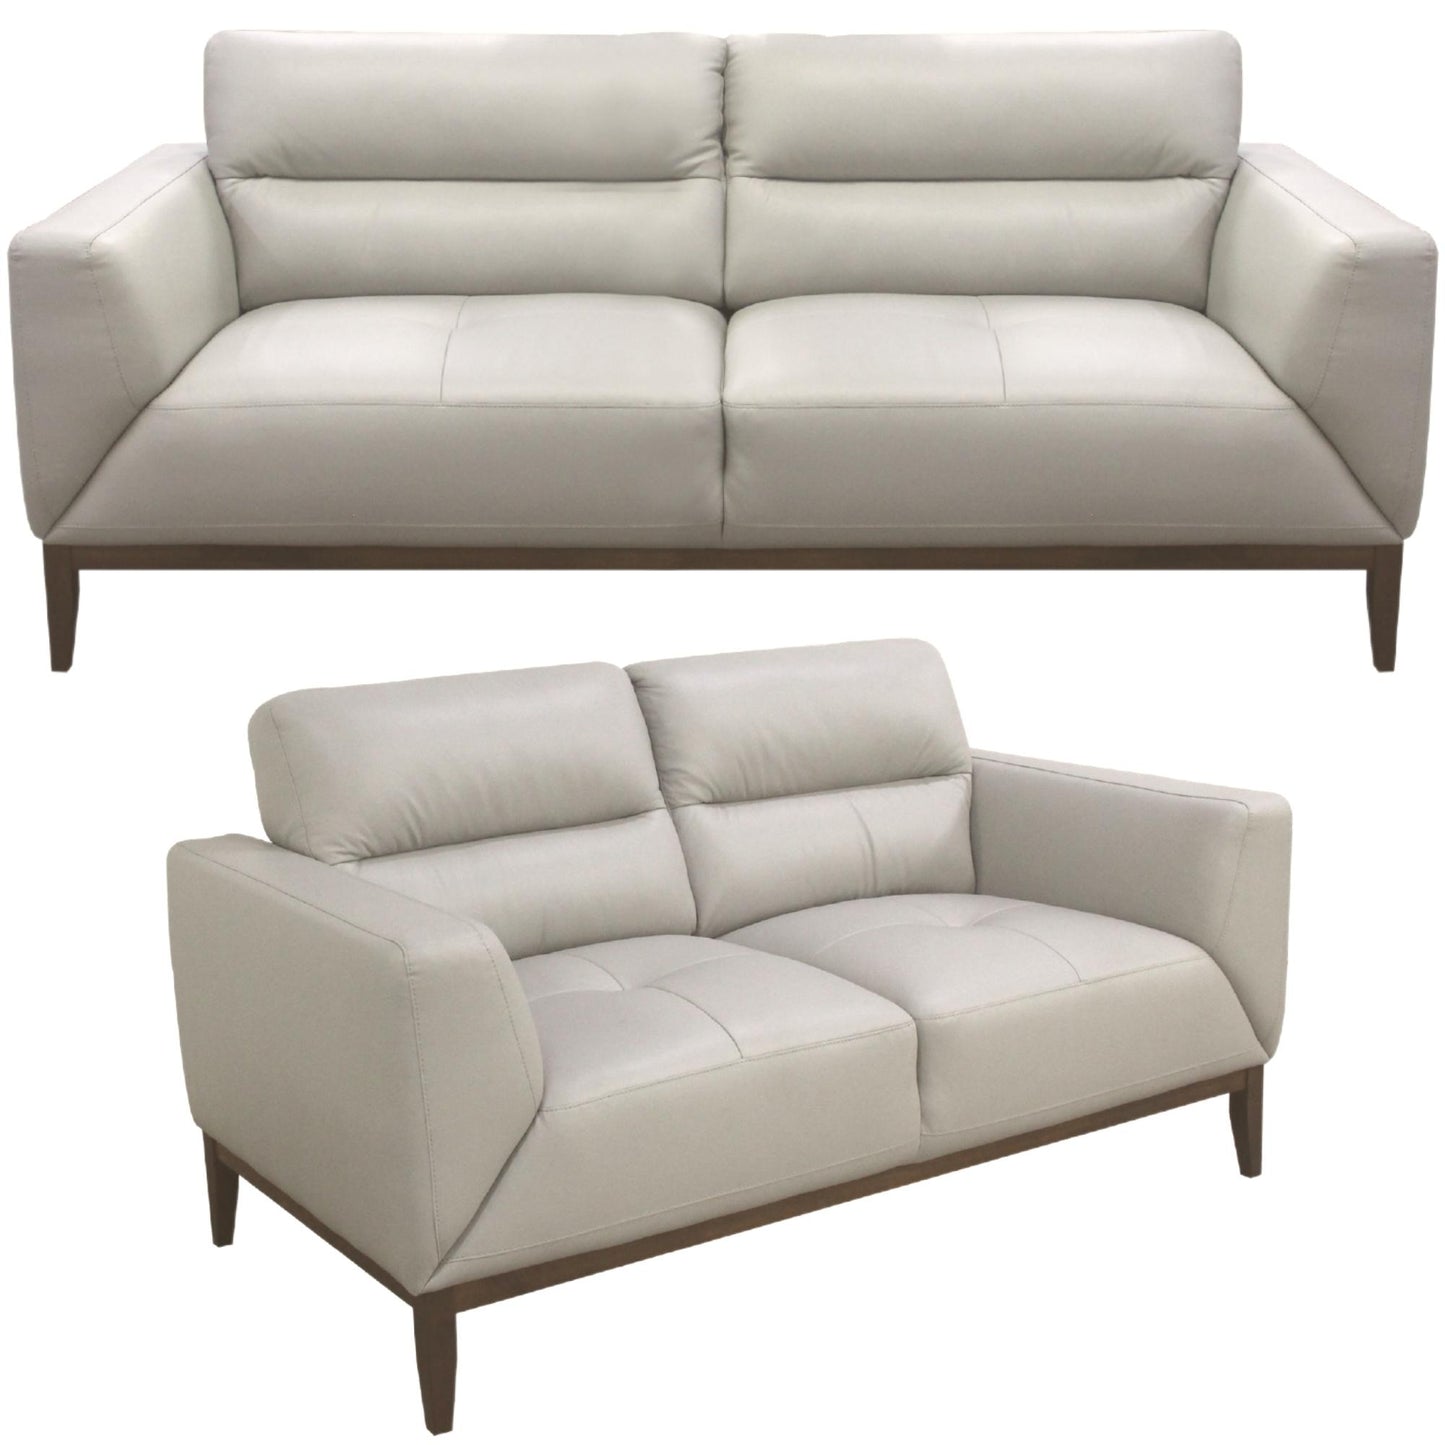 Downy Genuine Leather Sofa Set 3 + 2 Seater Couch - Silver